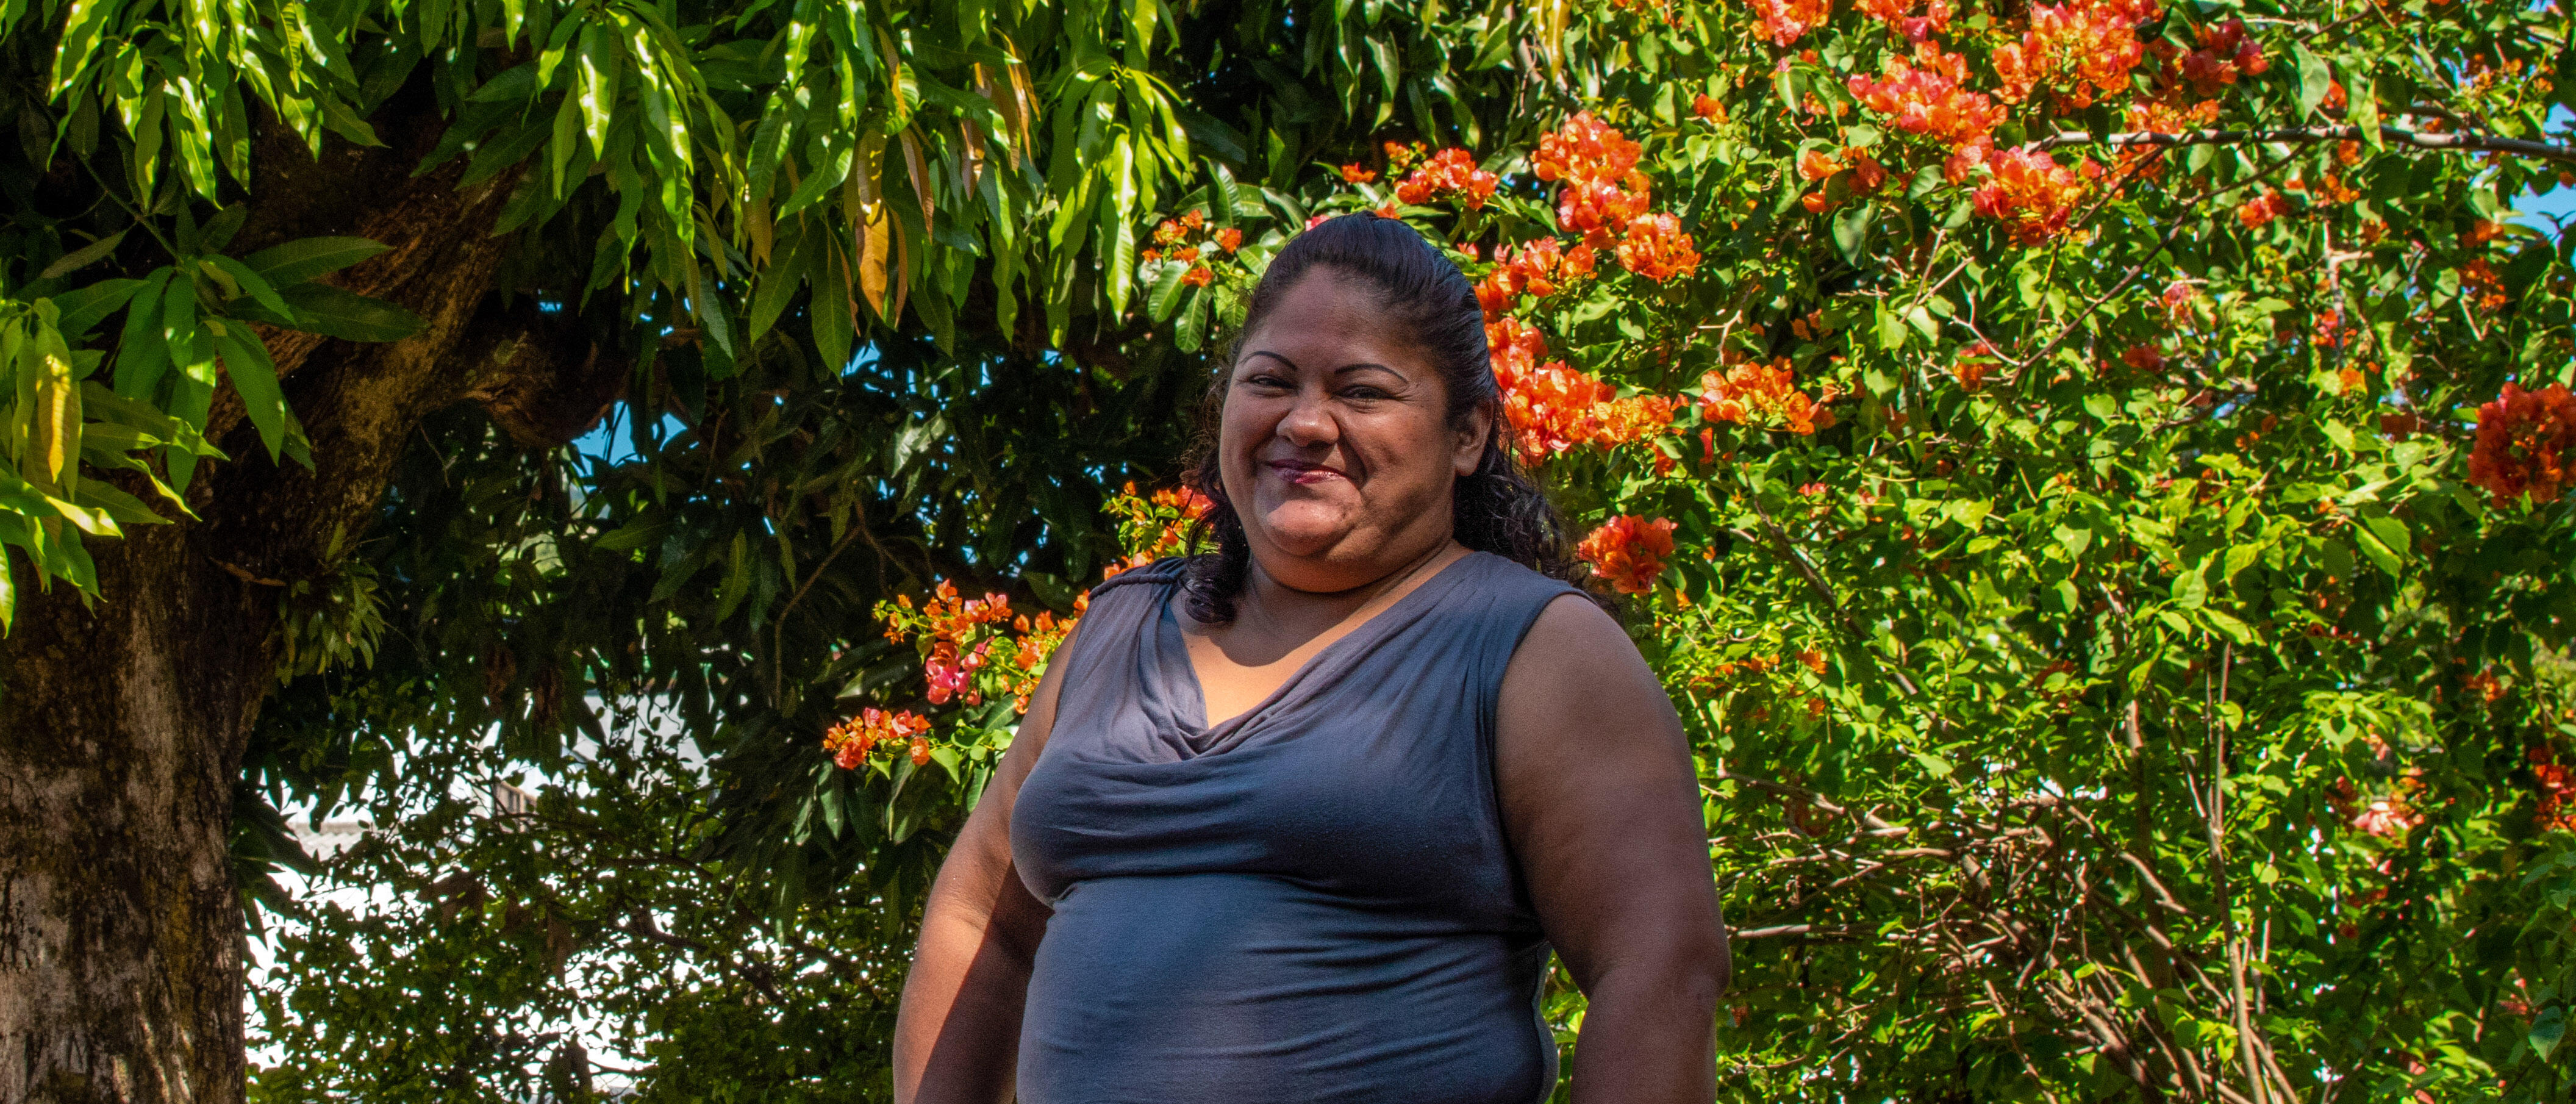 A woman poses for a portrait outside in El Salvador.